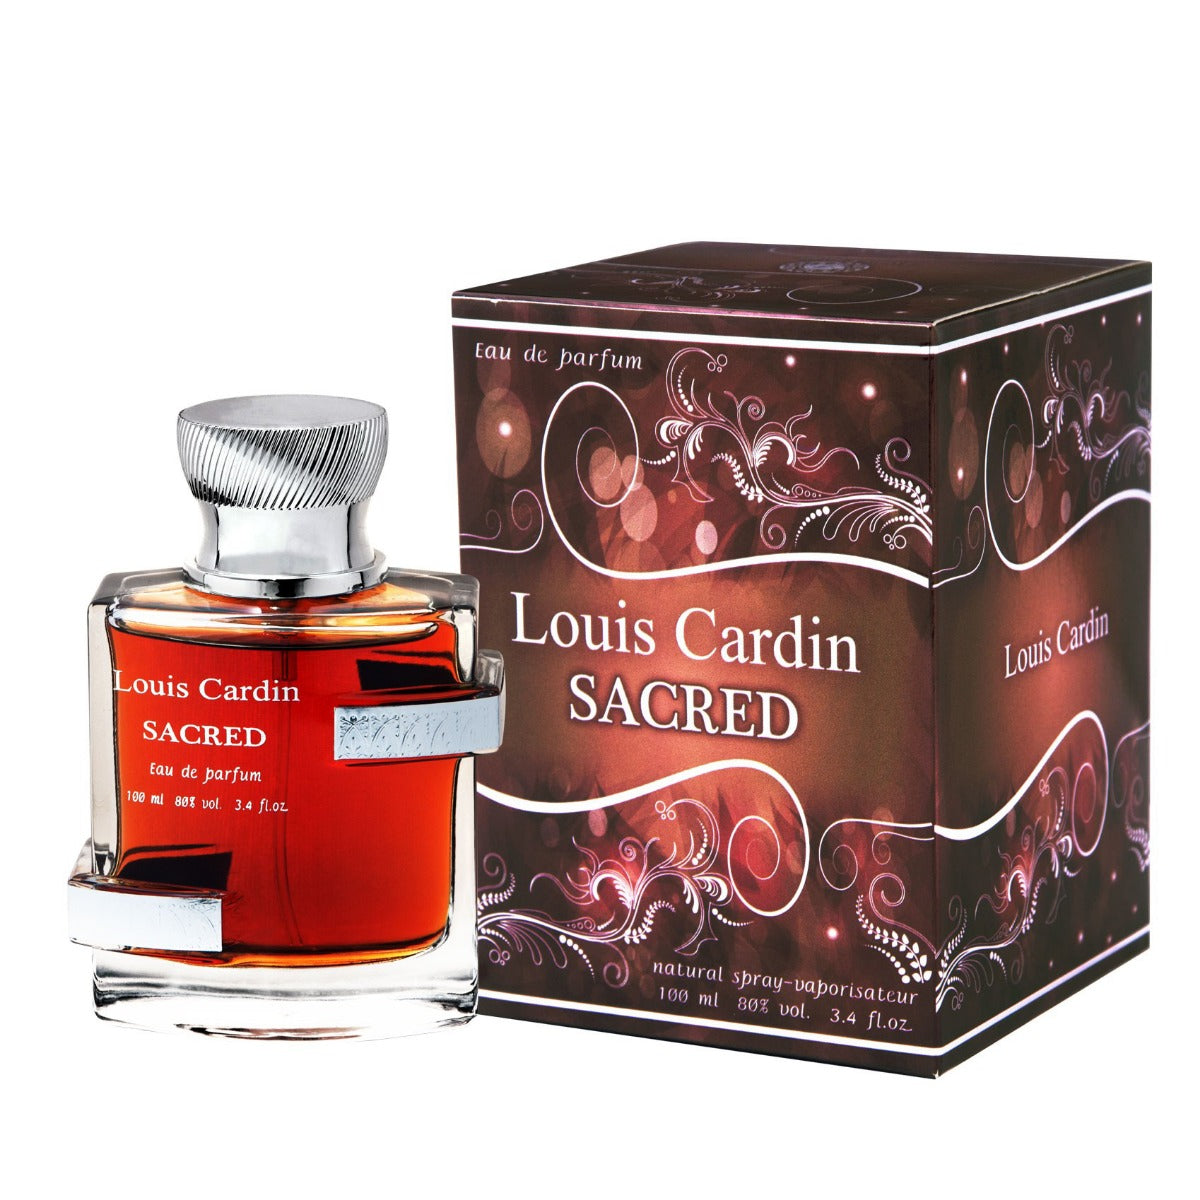 Illusion by Louis Cardin » Reviews & Perfume Facts